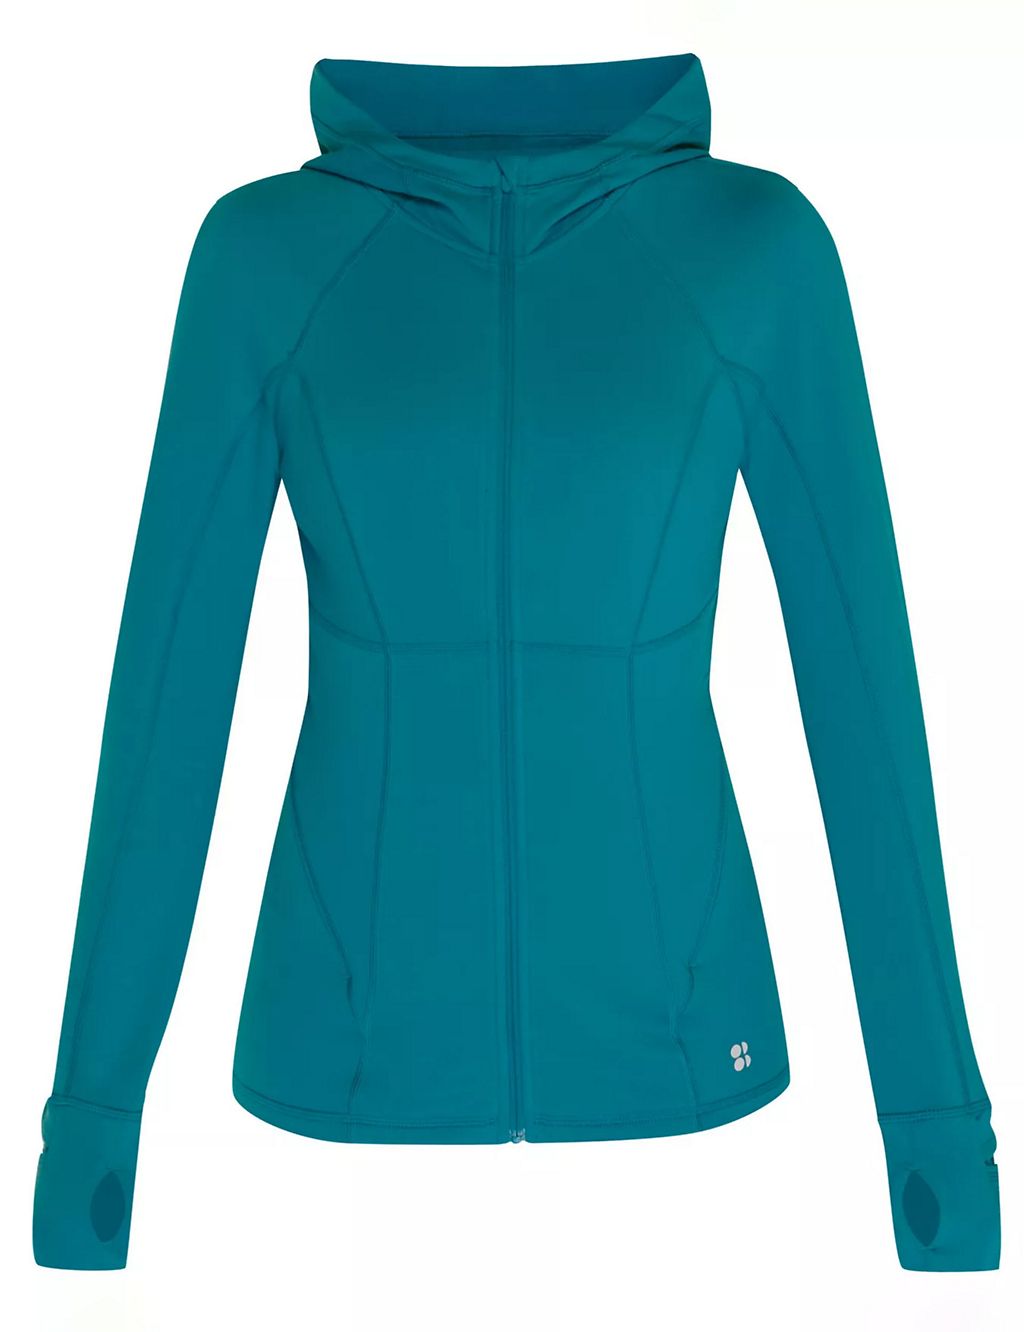 Pro Run Zip Up Hooded Sports Jacket 1 of 6